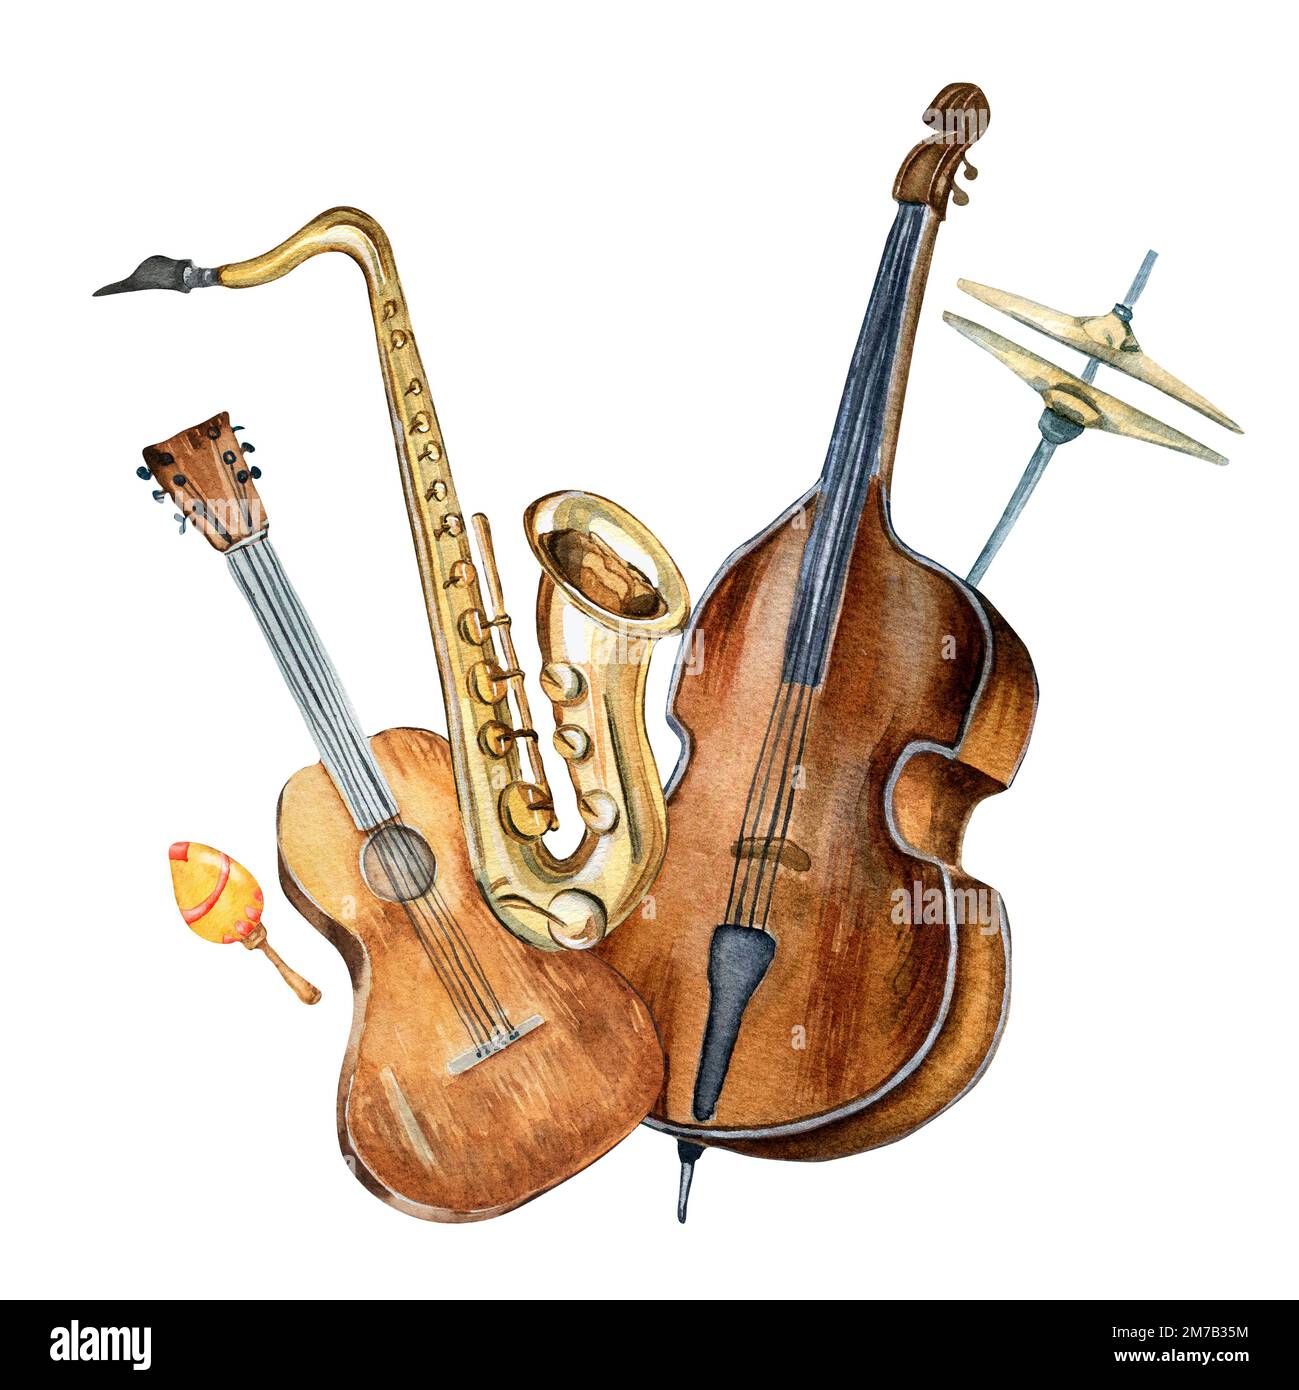 Composition of guitar, saxophone, contrabass musical instruments watercolor illustration isolated. Jazz musical instruments hand drawn. Design element Stock Photo